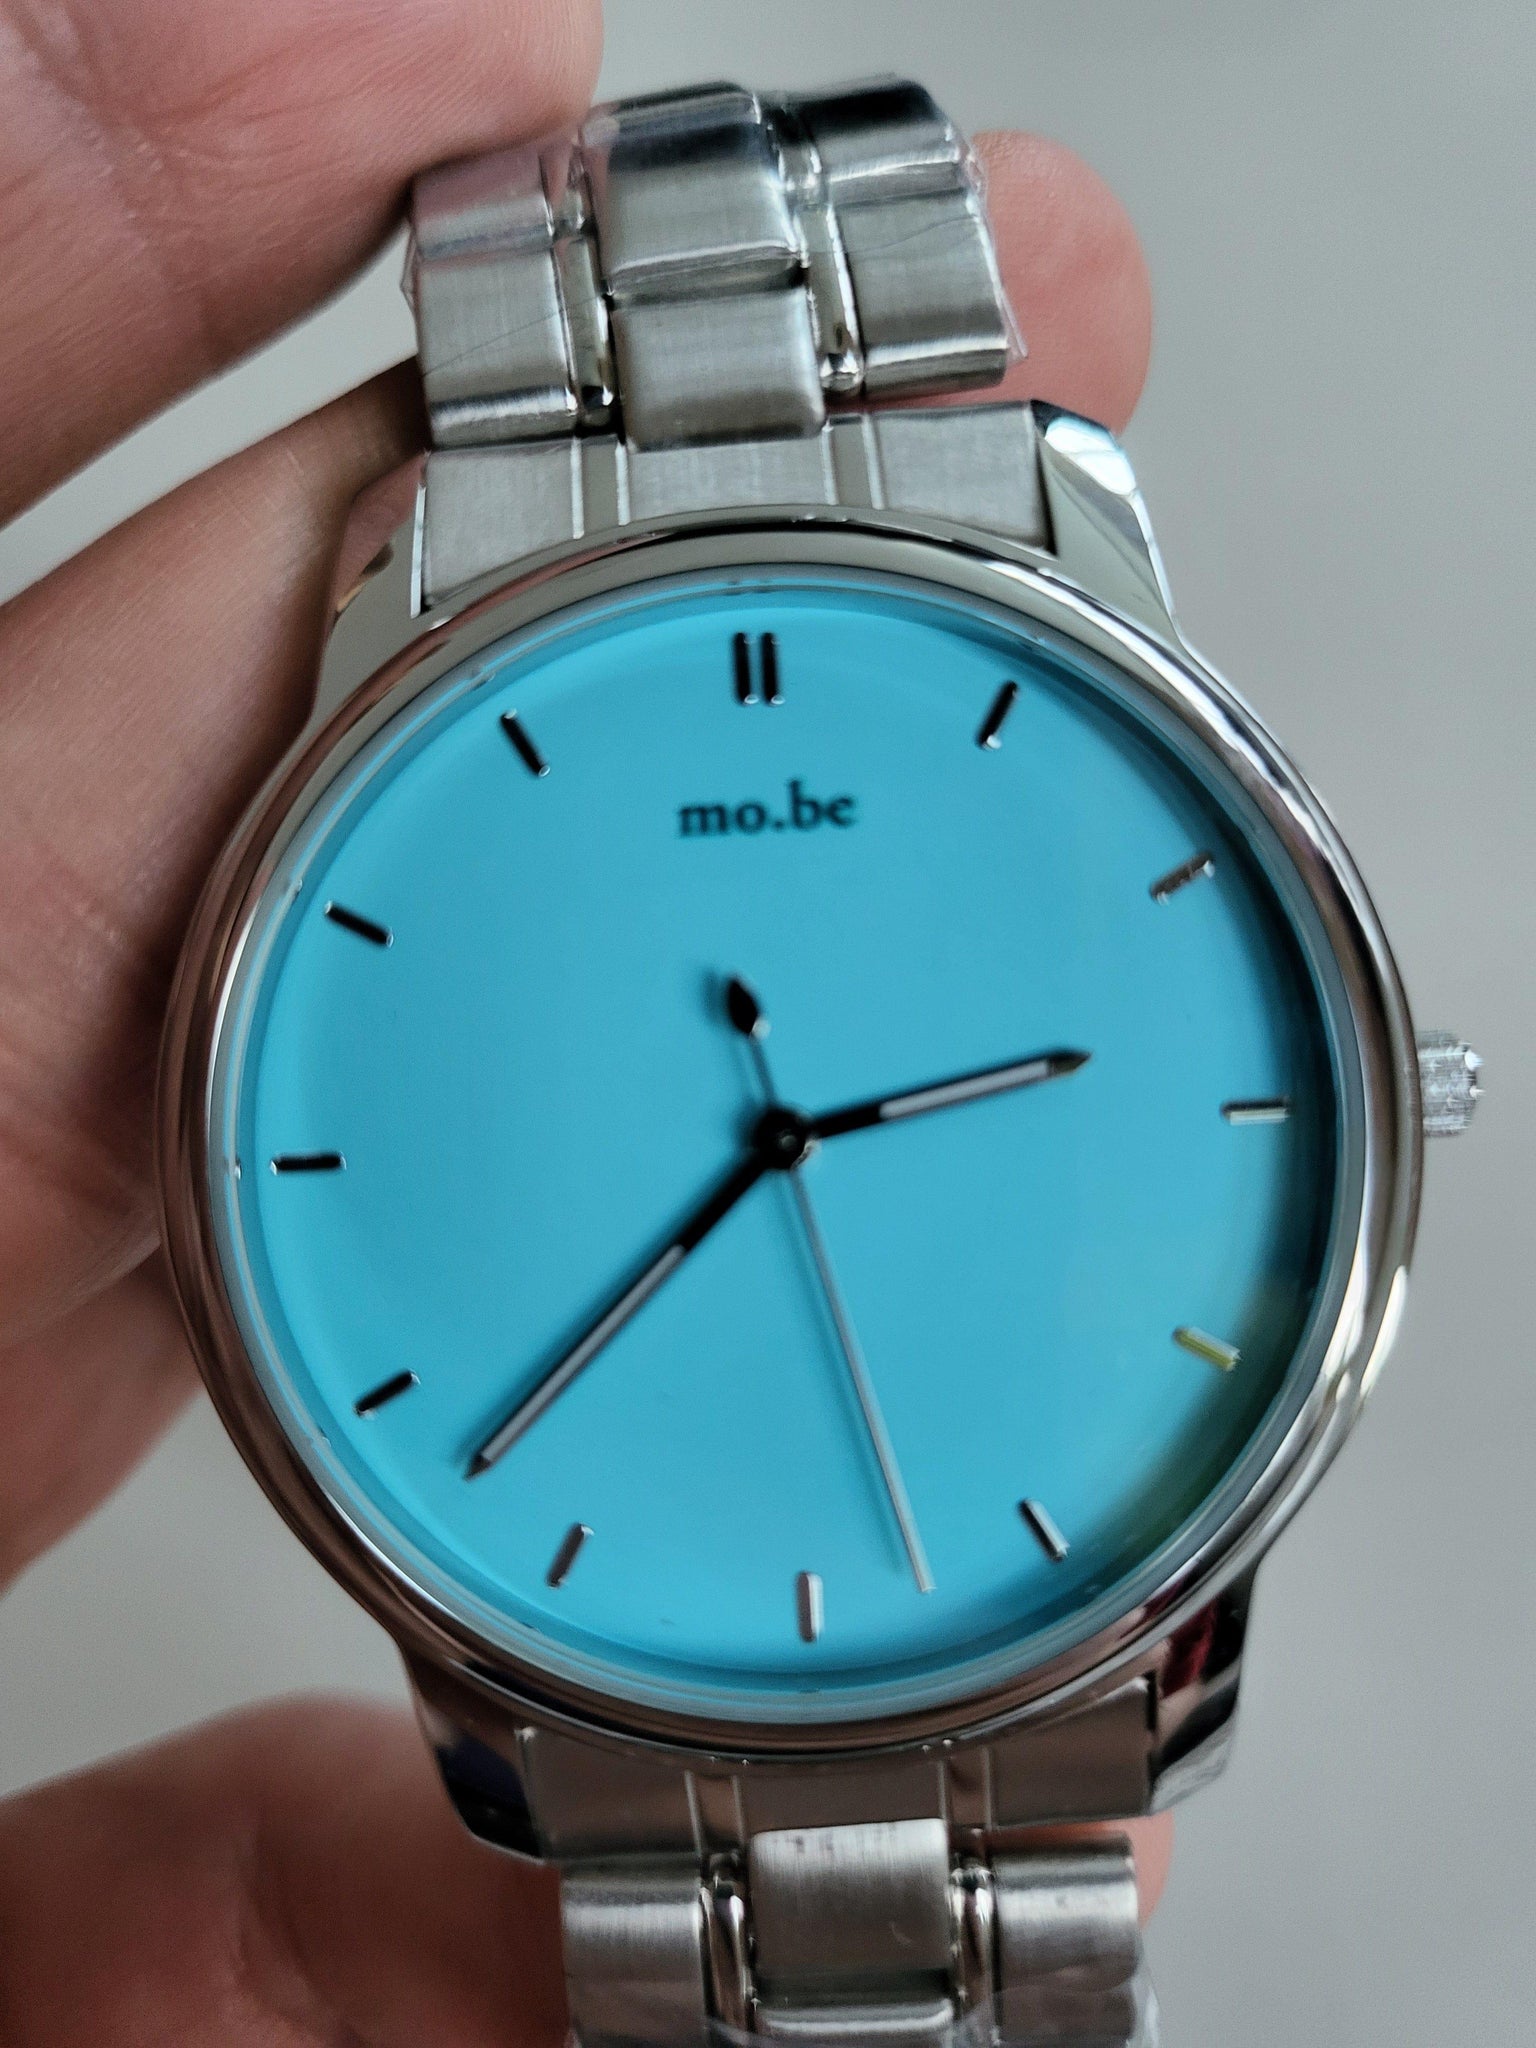 mo.be Maddison watch (LIMITED EDITION) - mo.be